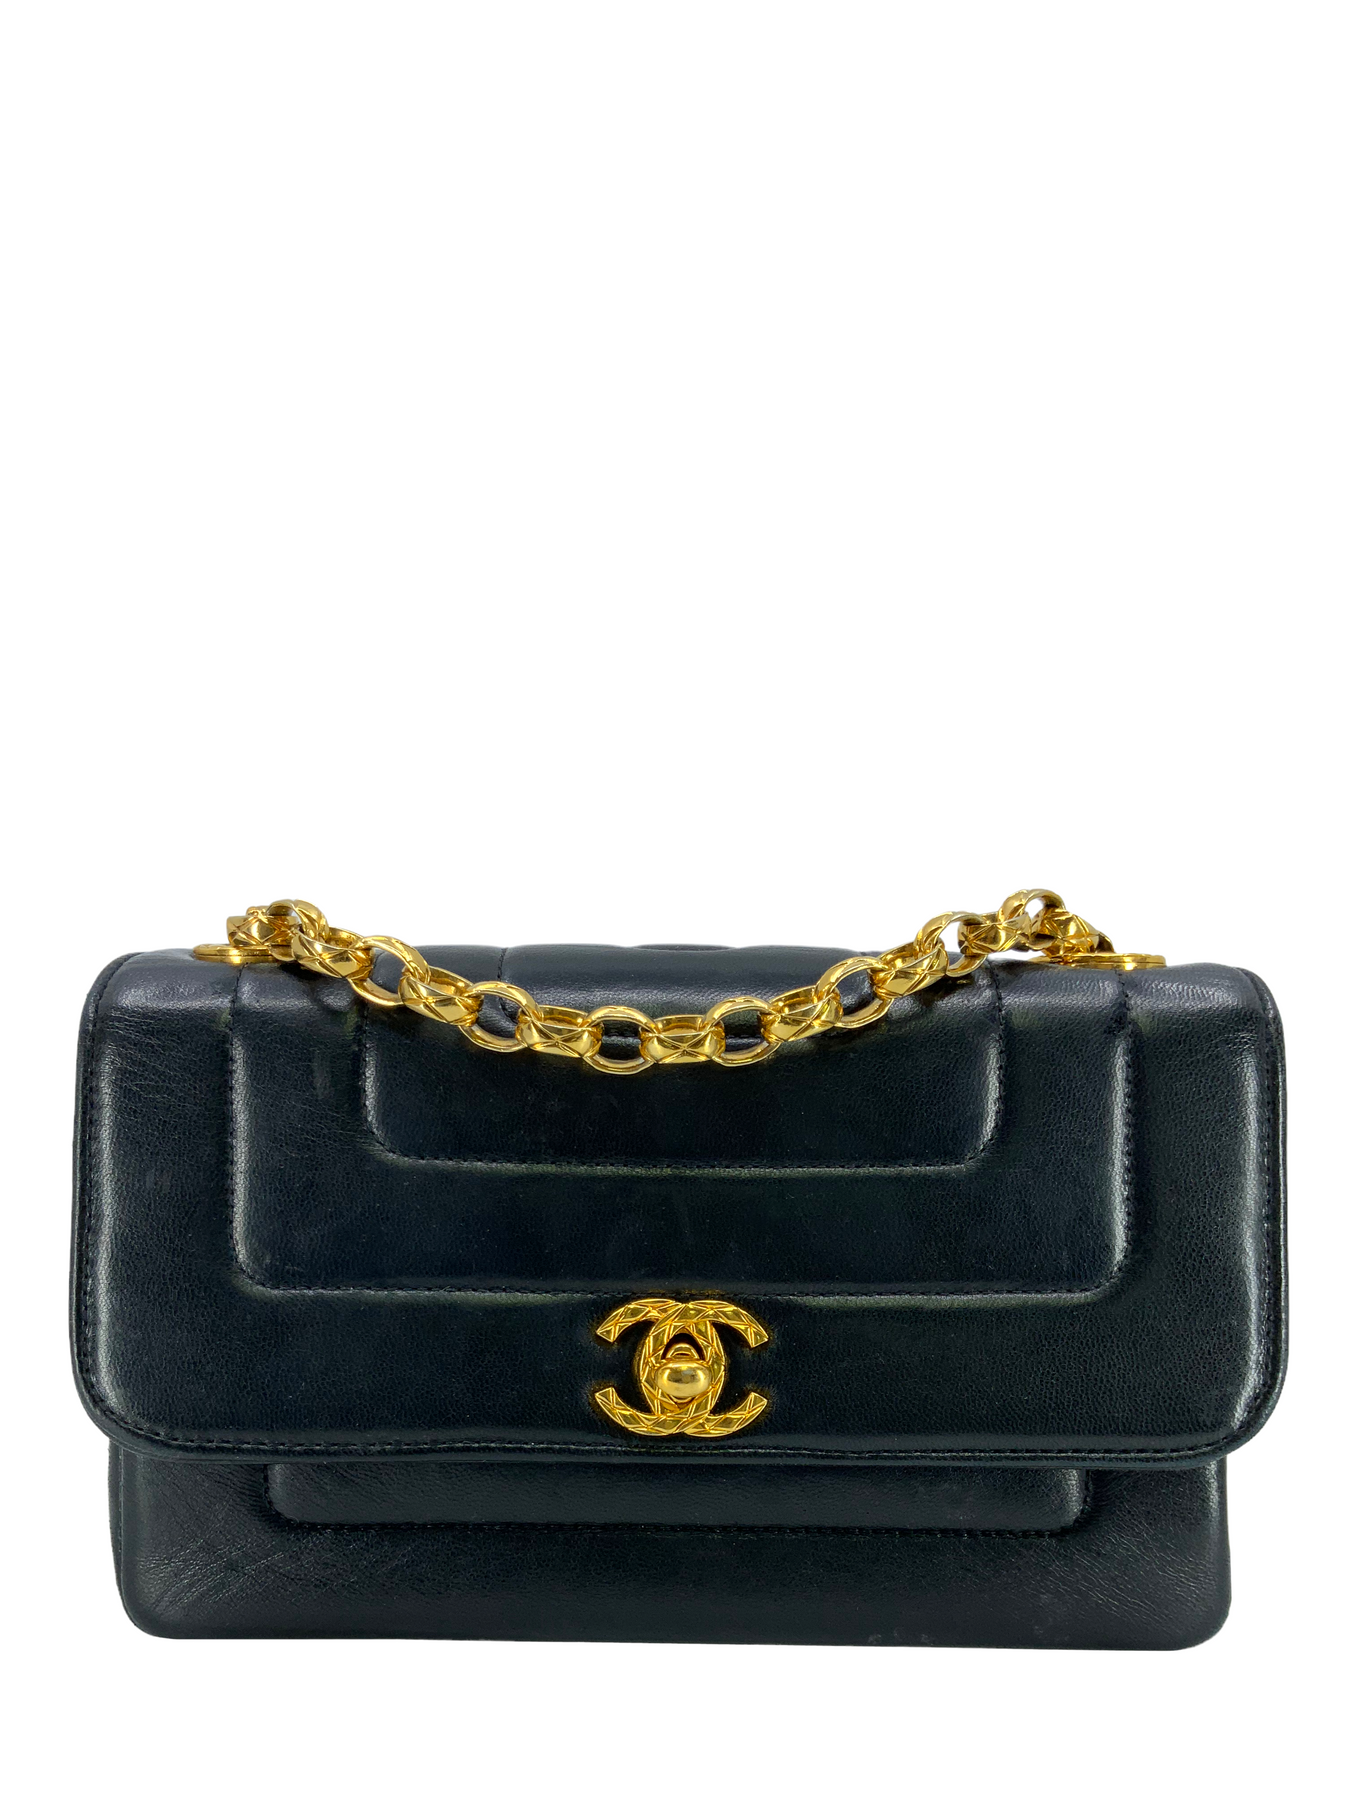 Chanel Vintage Quilted Vertical Stitch Lambskin Classic Mini Flap Bag -  Consigned Designs